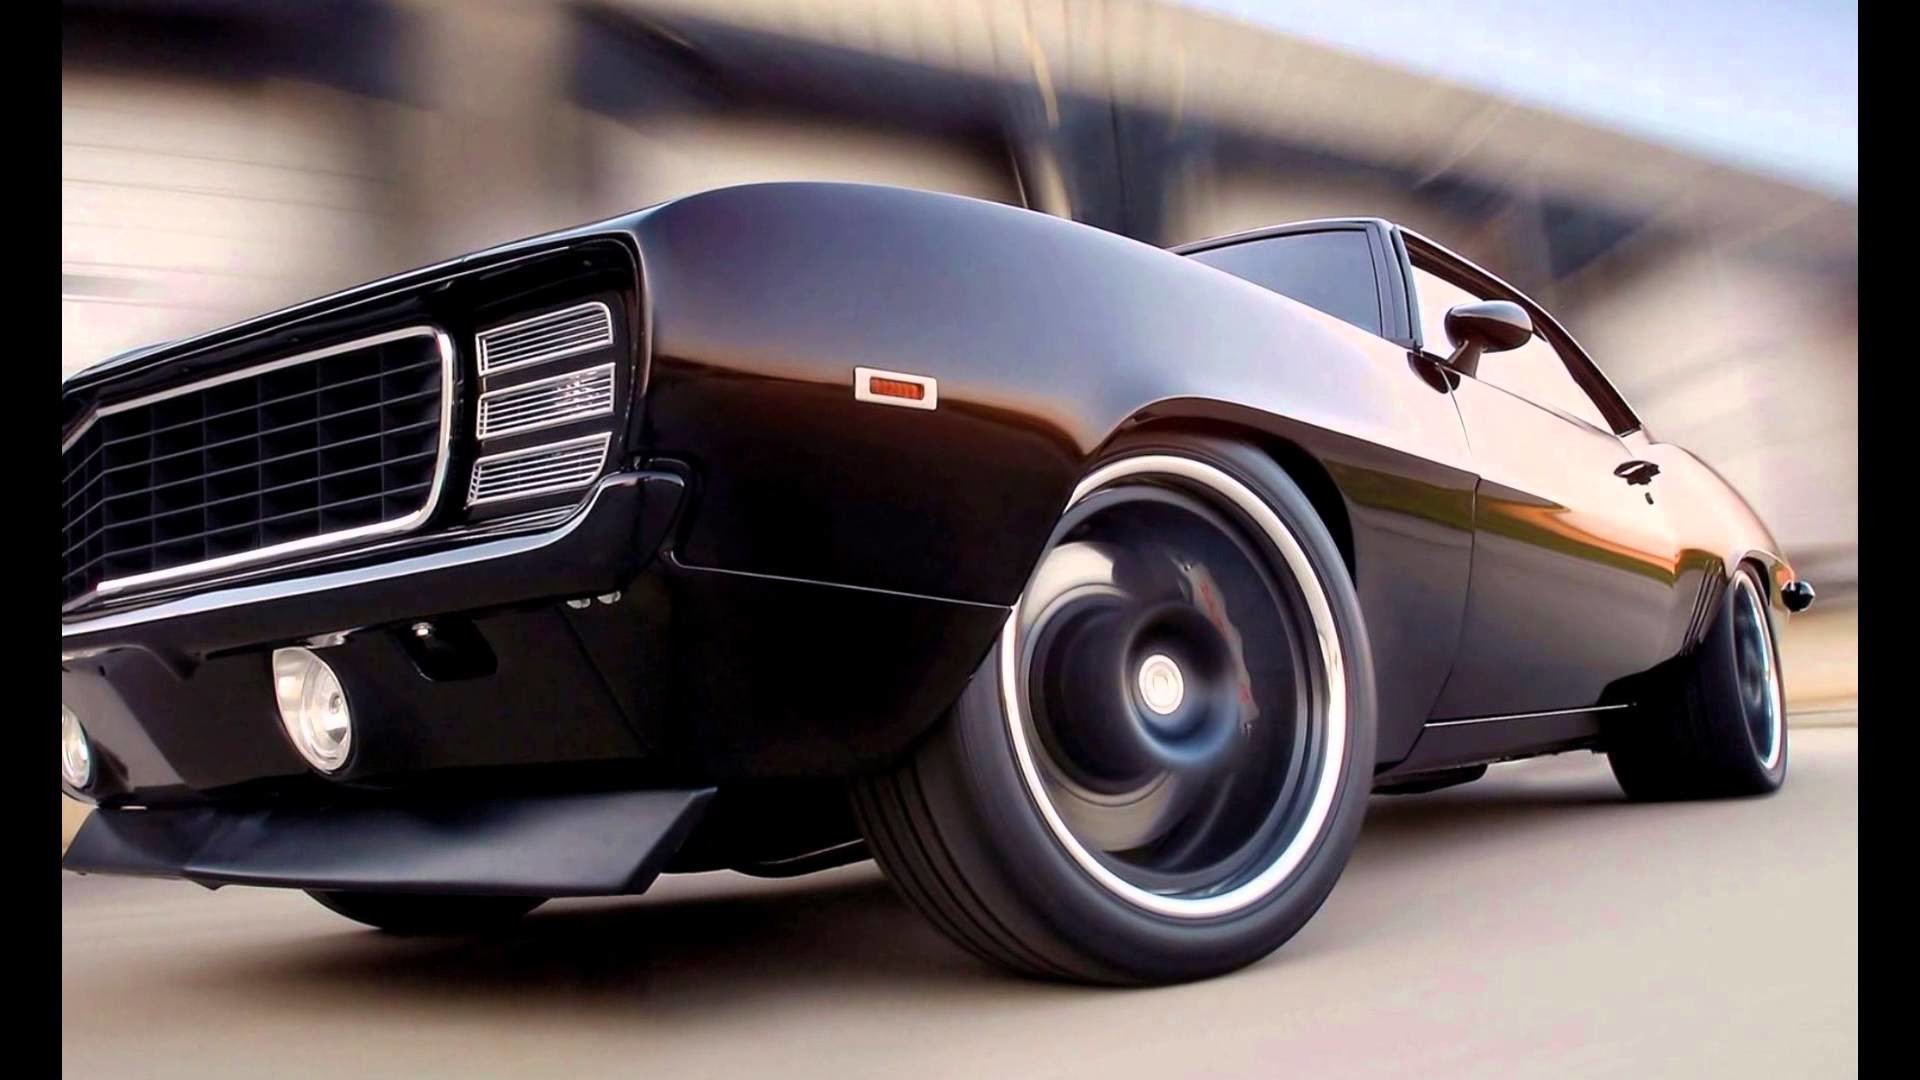 1920x1080 Latest Gallery of Muscle Car Wallpapers